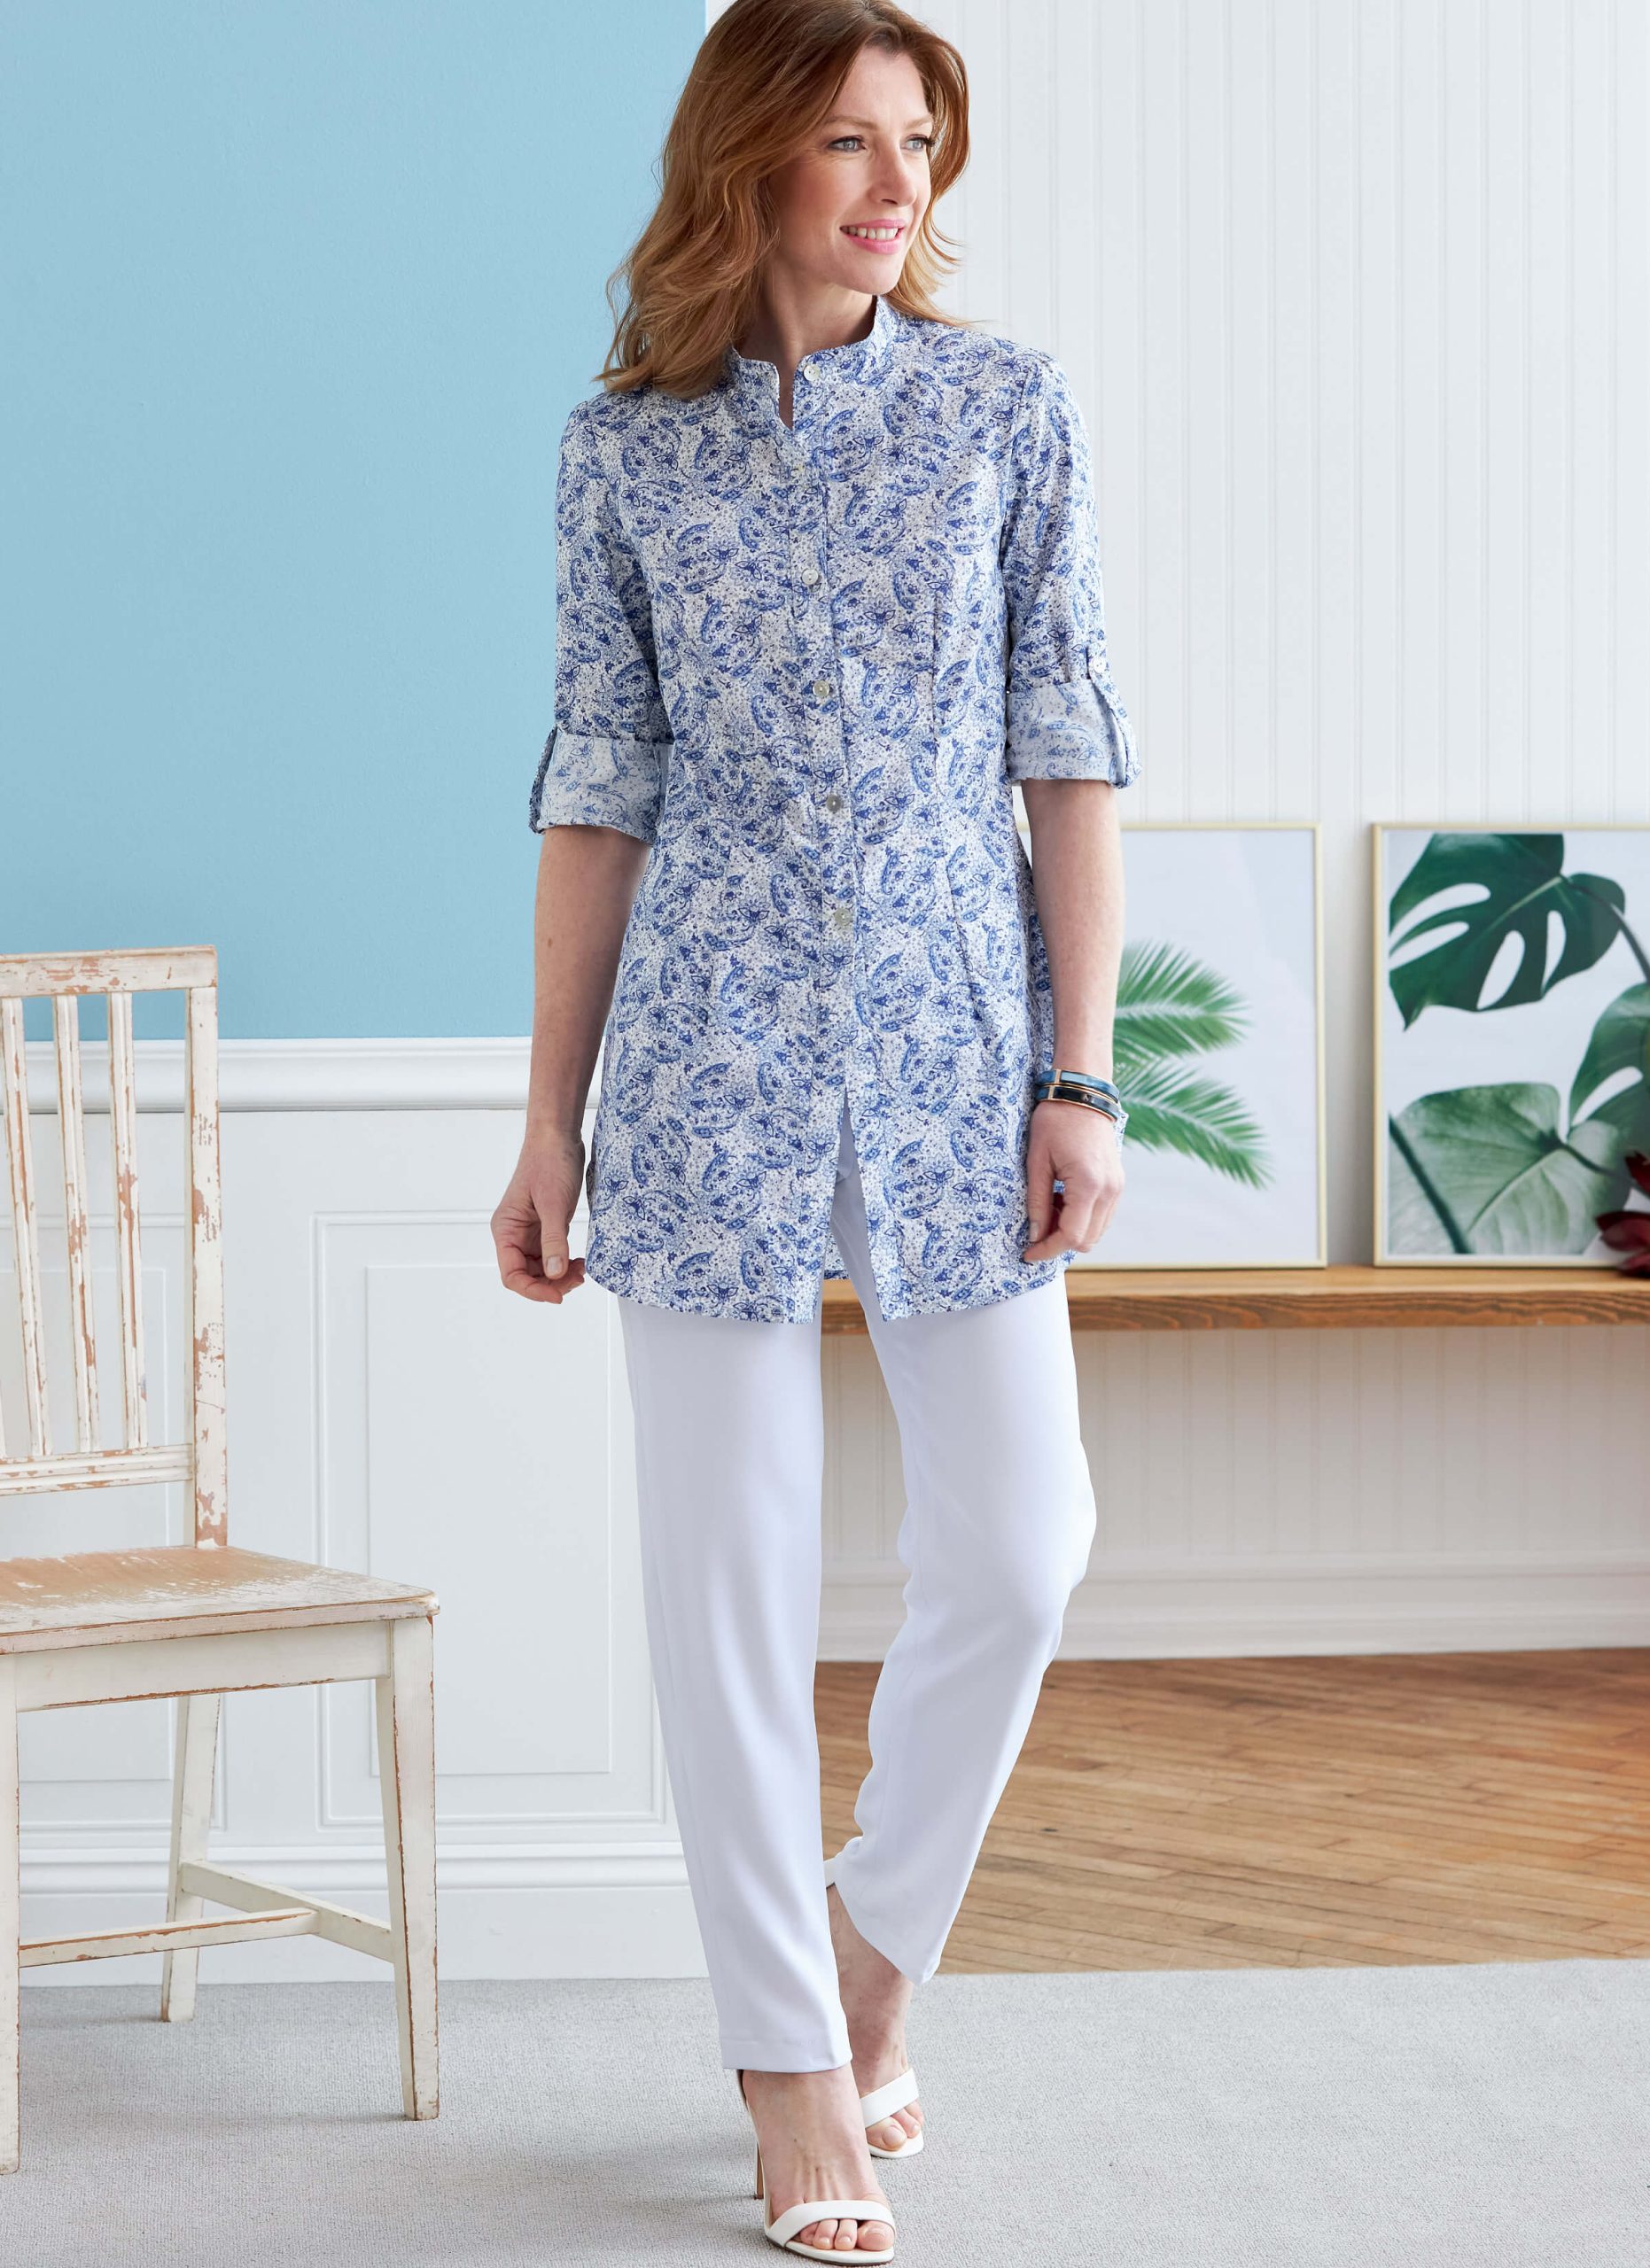 Butterick Sewing Pattern B6852 Misses' Button-Down Shirts With Collar, Sleeve & Hem Variations Palmer/Pletsch